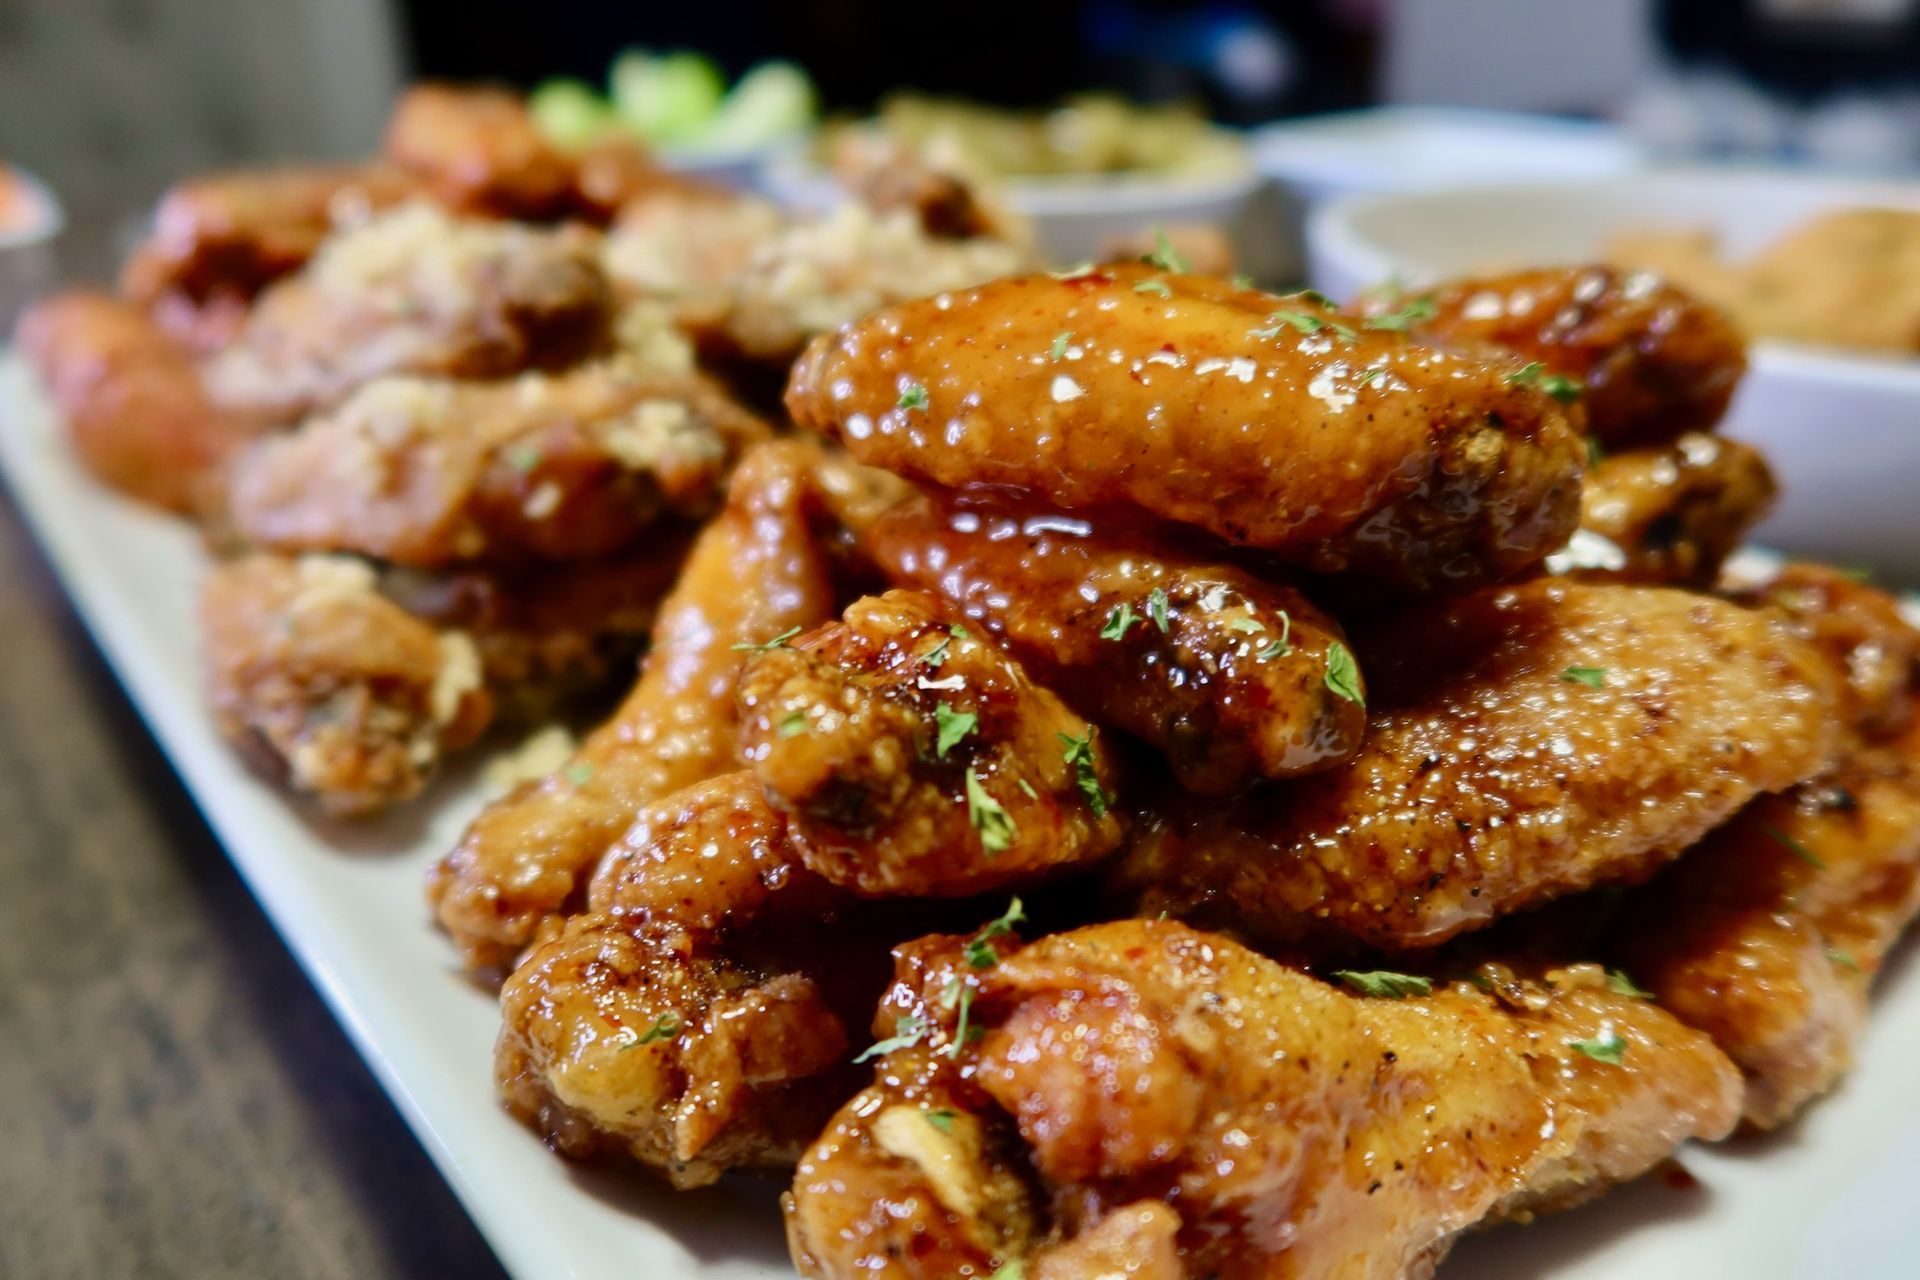 A close up of a plate of chicken wings on a table.